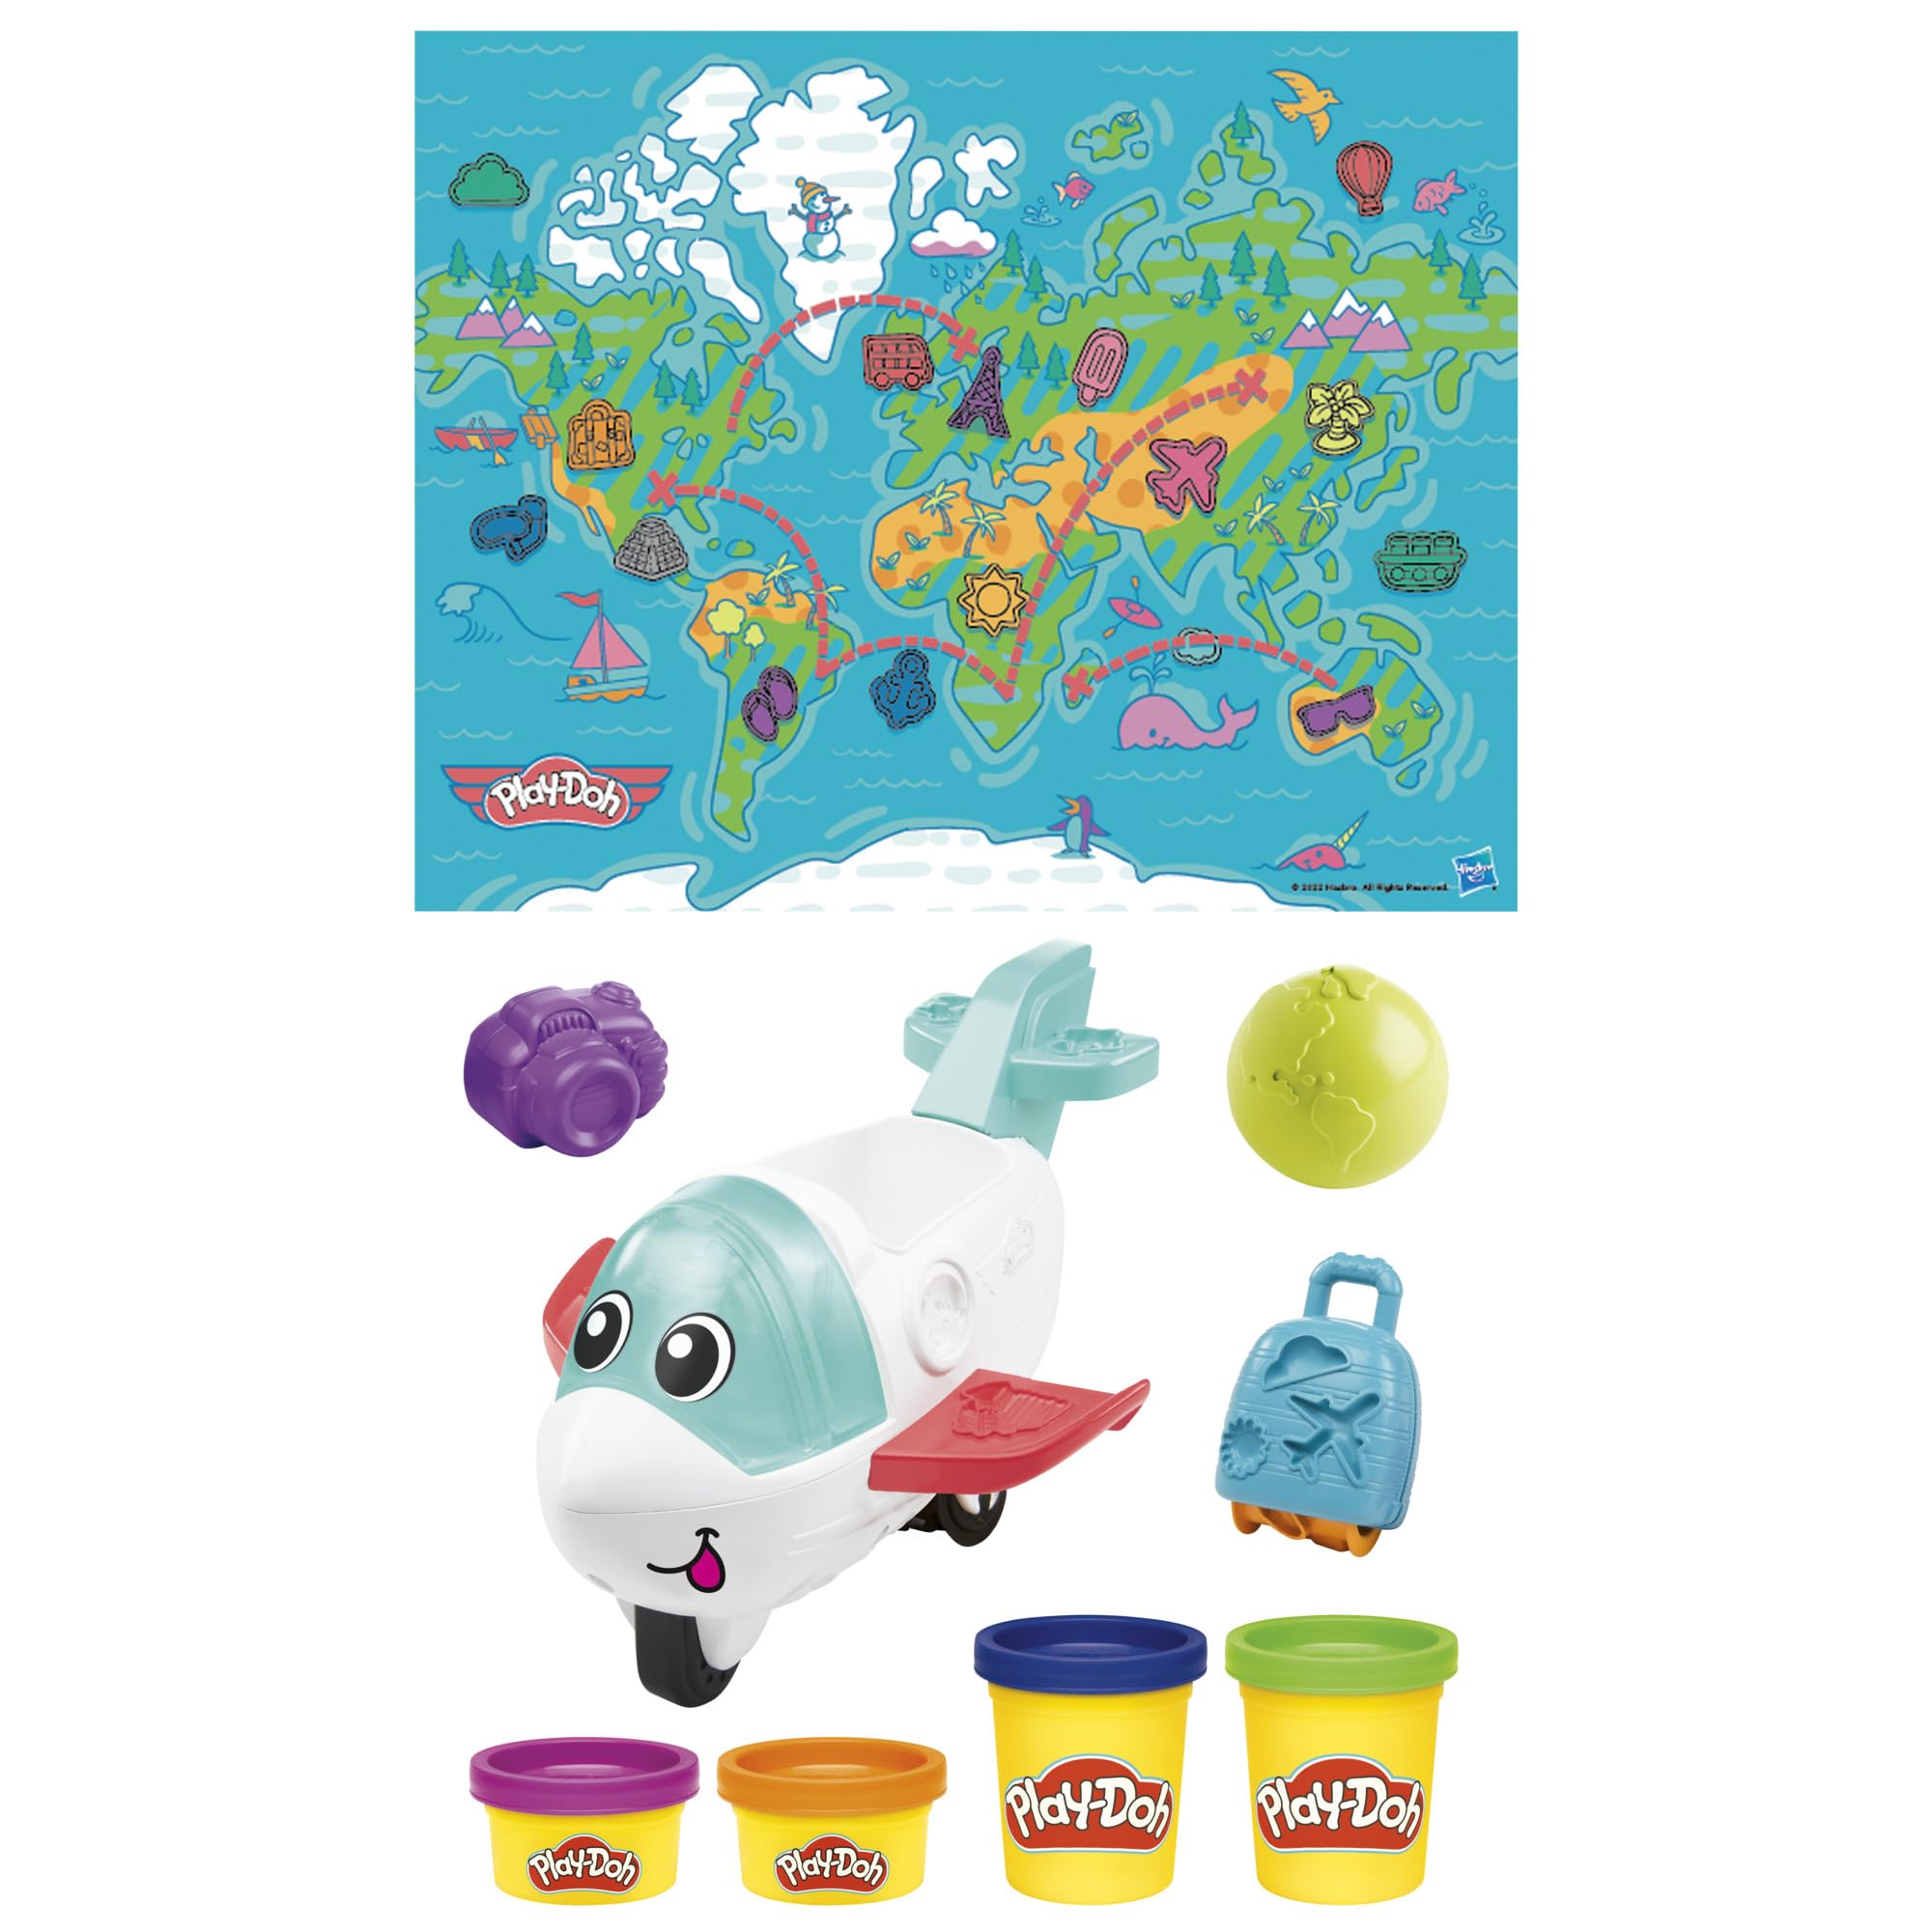 Play-Doh Airplane Explorer Starter Set, Preschool Toys for 3 Year Old Girls & Boys & Up with Jet, World Map Playmat, 3 Accessories, & 4 Modeling Compound Colors